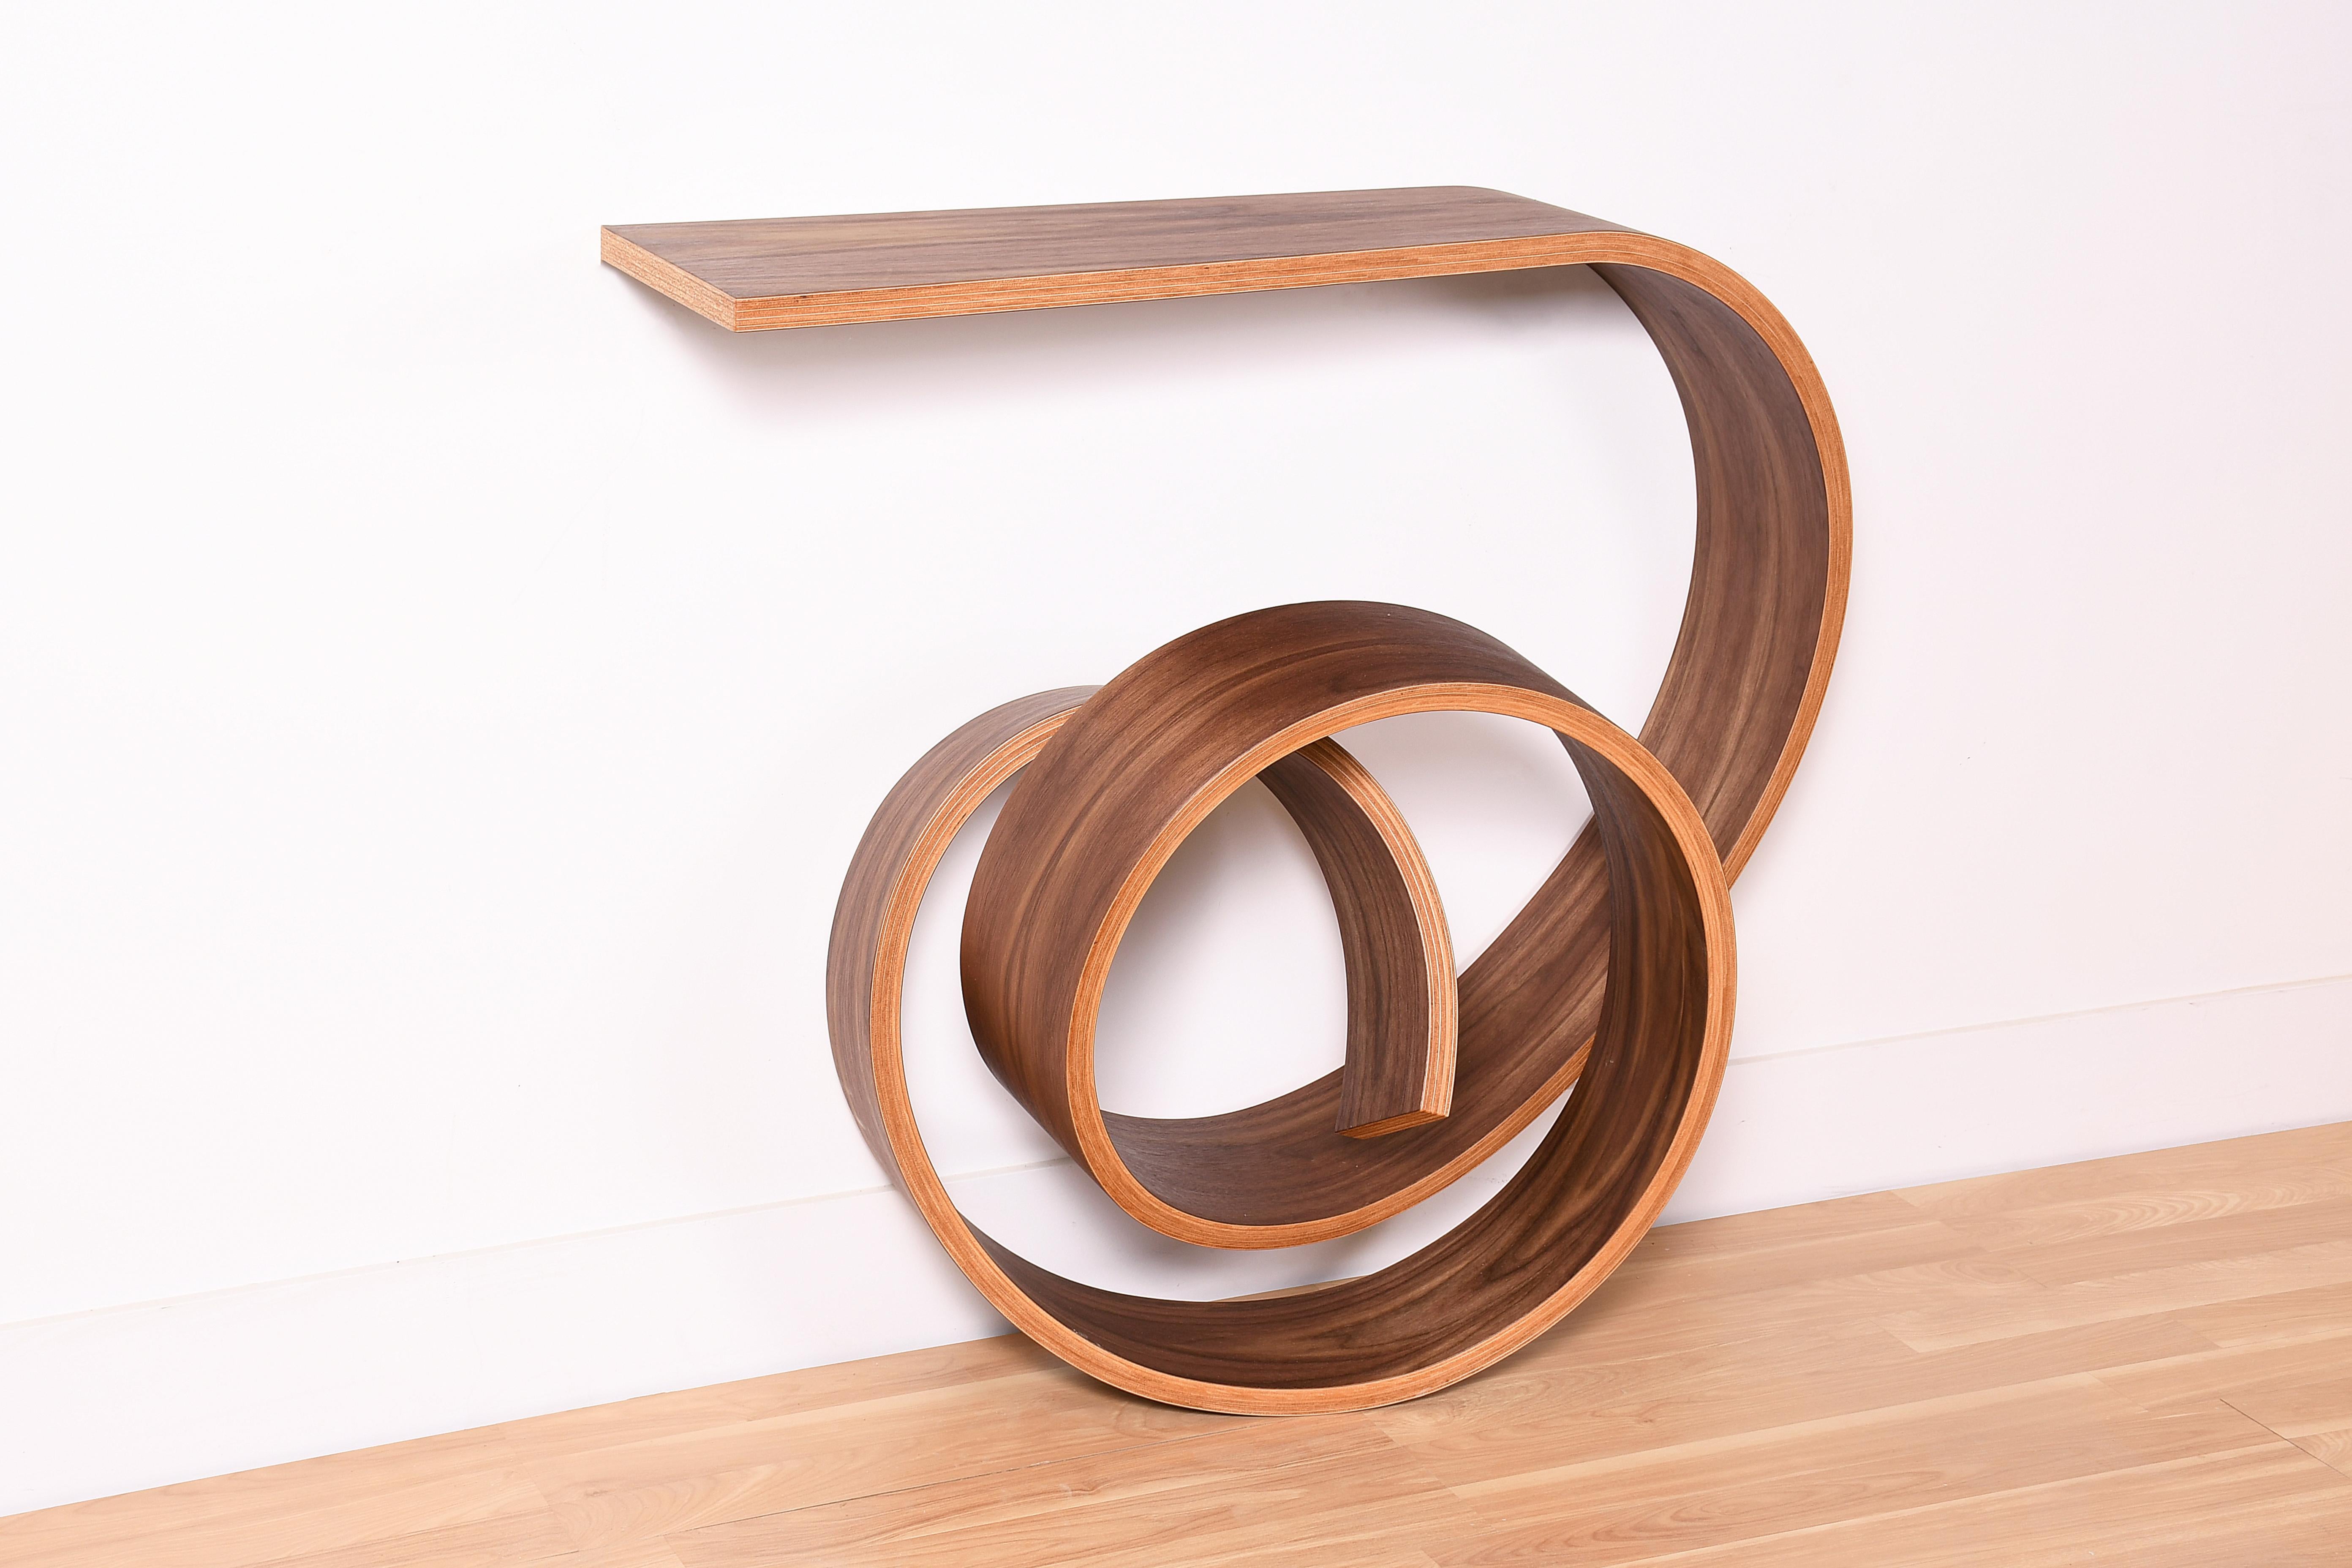 This extraordinary console table has been bent into a knotted form, it’s the result of many years of research on the technique of bent lamination. It’s my second best selling piece since a few years now. I’ve made several ones with different woods